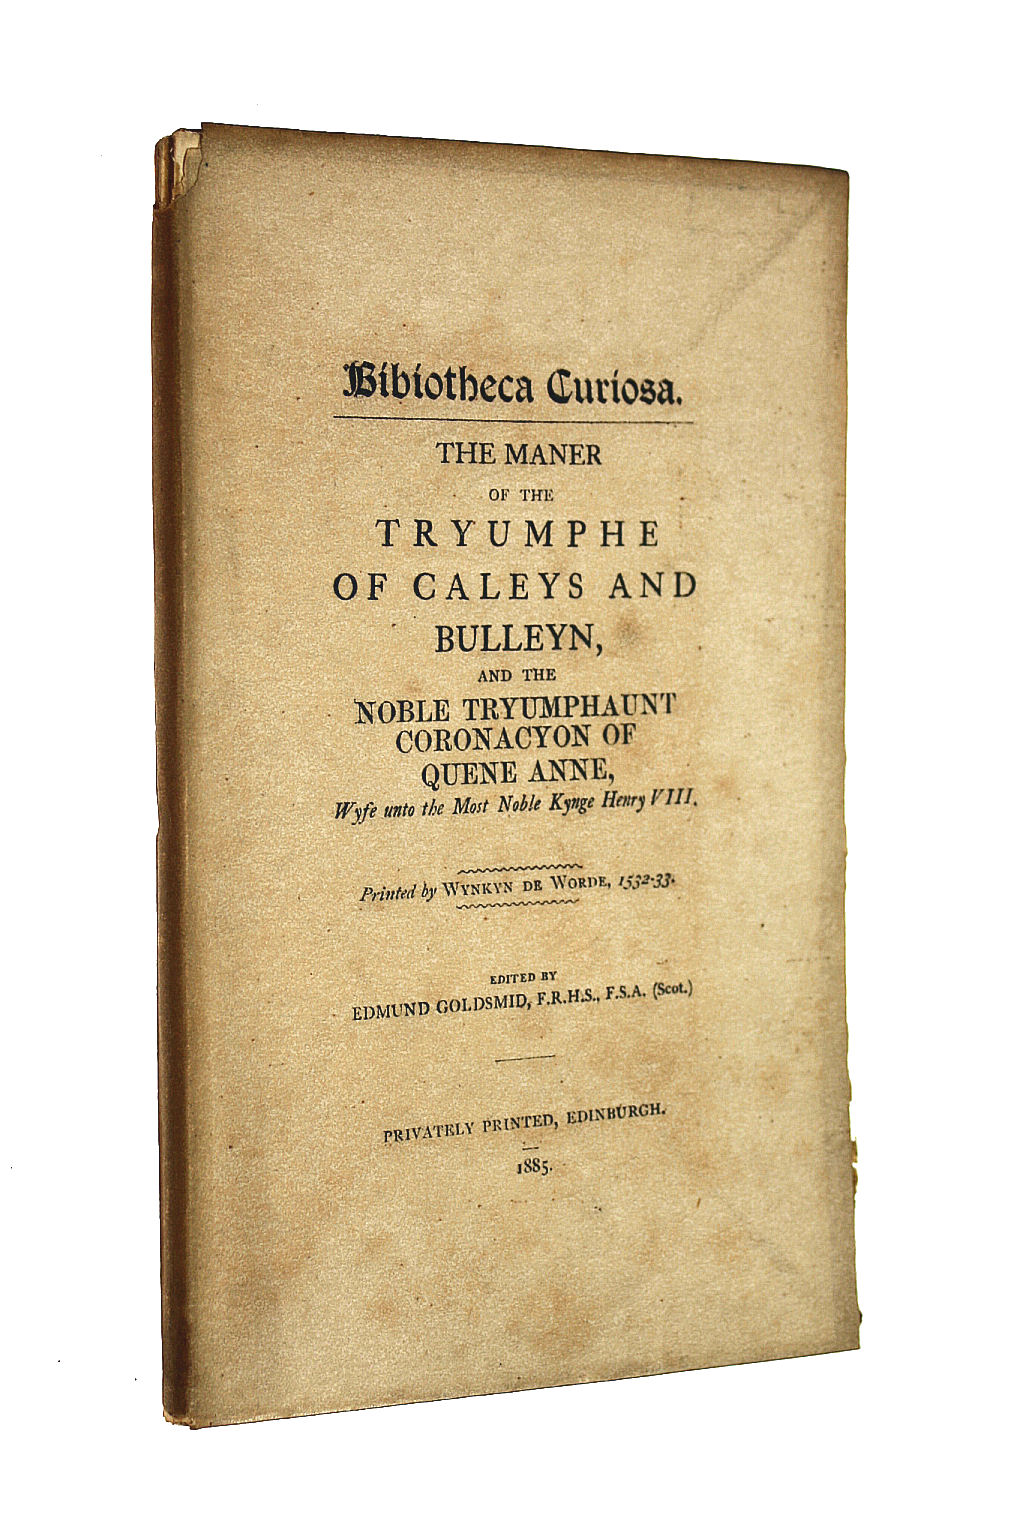 GOLDSMID, EDMUND [EDITOR] - Bibliotheca Curiosa : The Maner of the Tryumphe of Caleys and Bulleyn and the Noble Tryumphaunt Coronacyon of Quene Anne Wyfe untomthe Most Noble Kynge Henry VIII . Printed by Wykyn de Worde 1532-1533